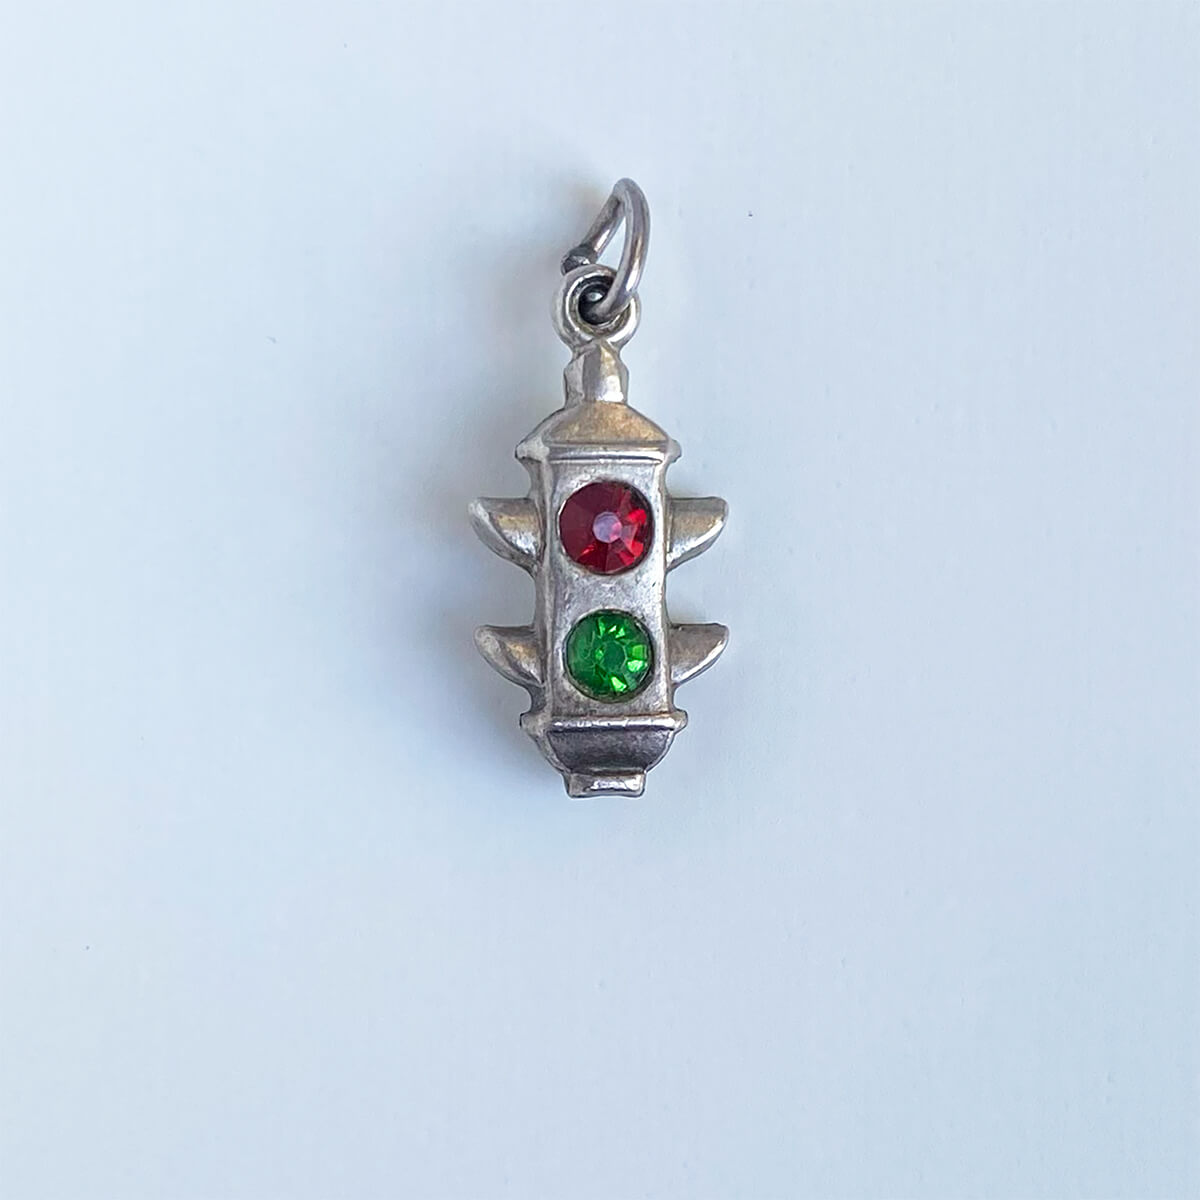 Vintage 1940s traffic lights charm sterling silver with green and red crystals from Charmarama